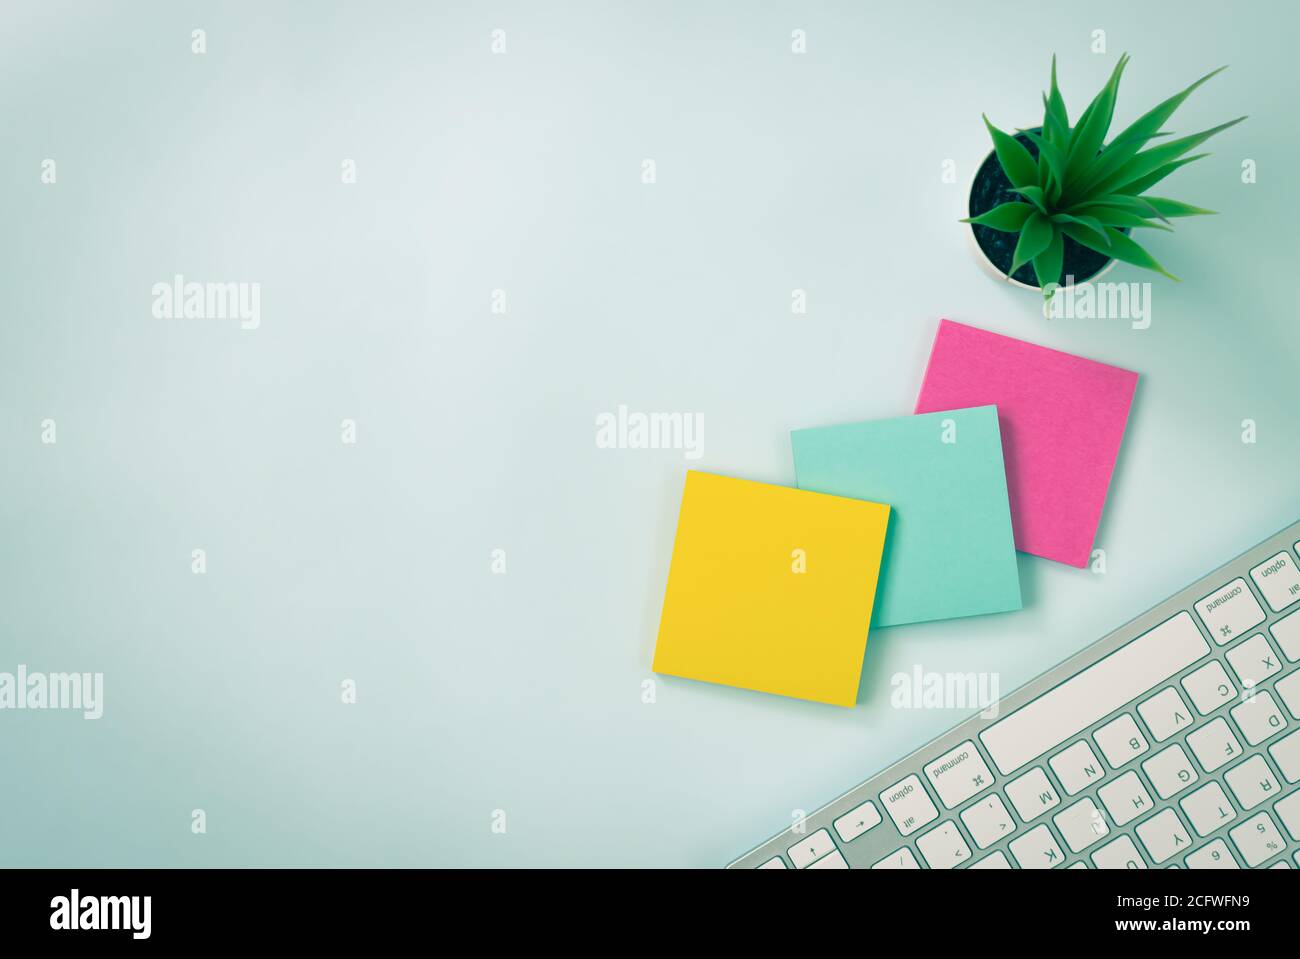 3 Sticky Note and Office Plants and Computer Keyboard on Modern Creative Office Desk or Office Table on Top View or Flat Lay. Blue Workspace Minimalis Stock Photo